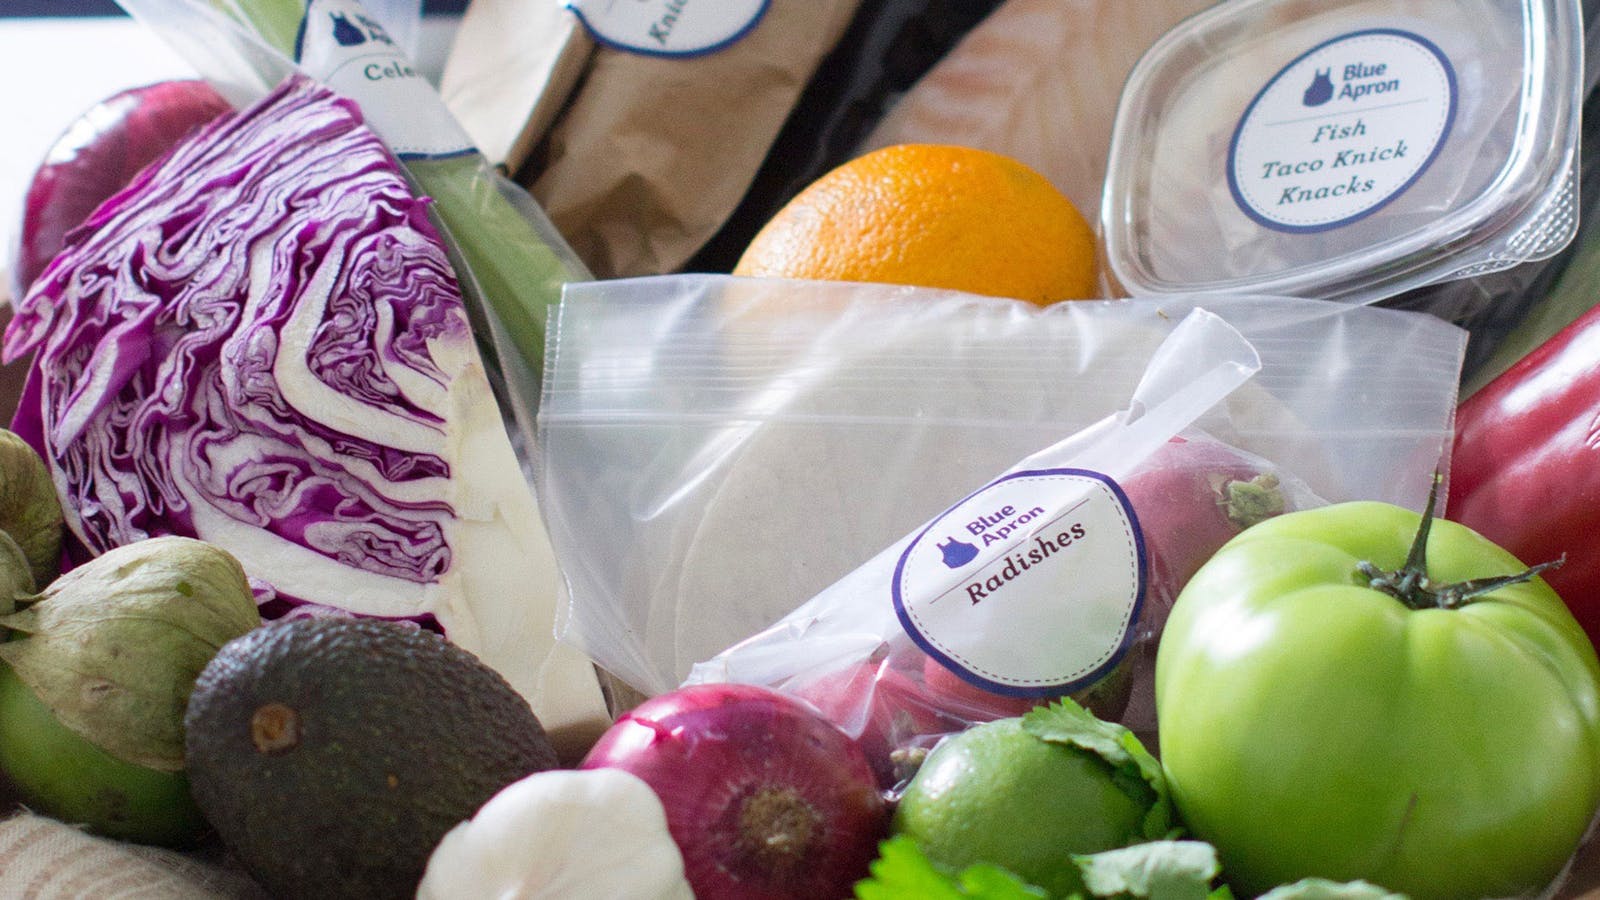 Blue Apron provides fresh ingredients for cooking. Photo by The Associated Press.